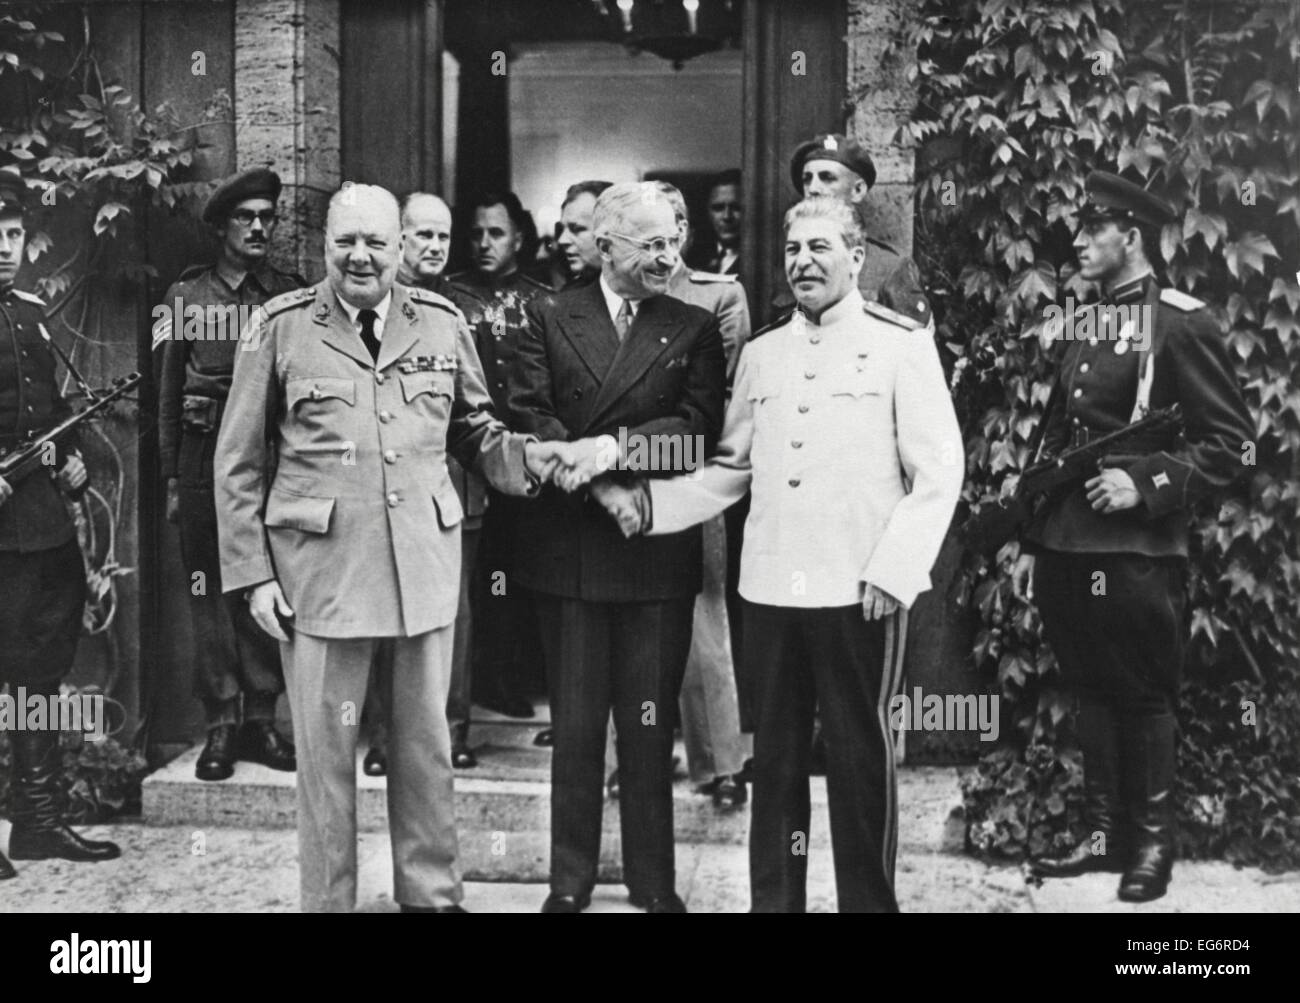 Joseph Stalin, Harry Truman, and Winston Churchill at the Potsdam Conference. While there, Churchill's Conservative Party lost Stock Photo